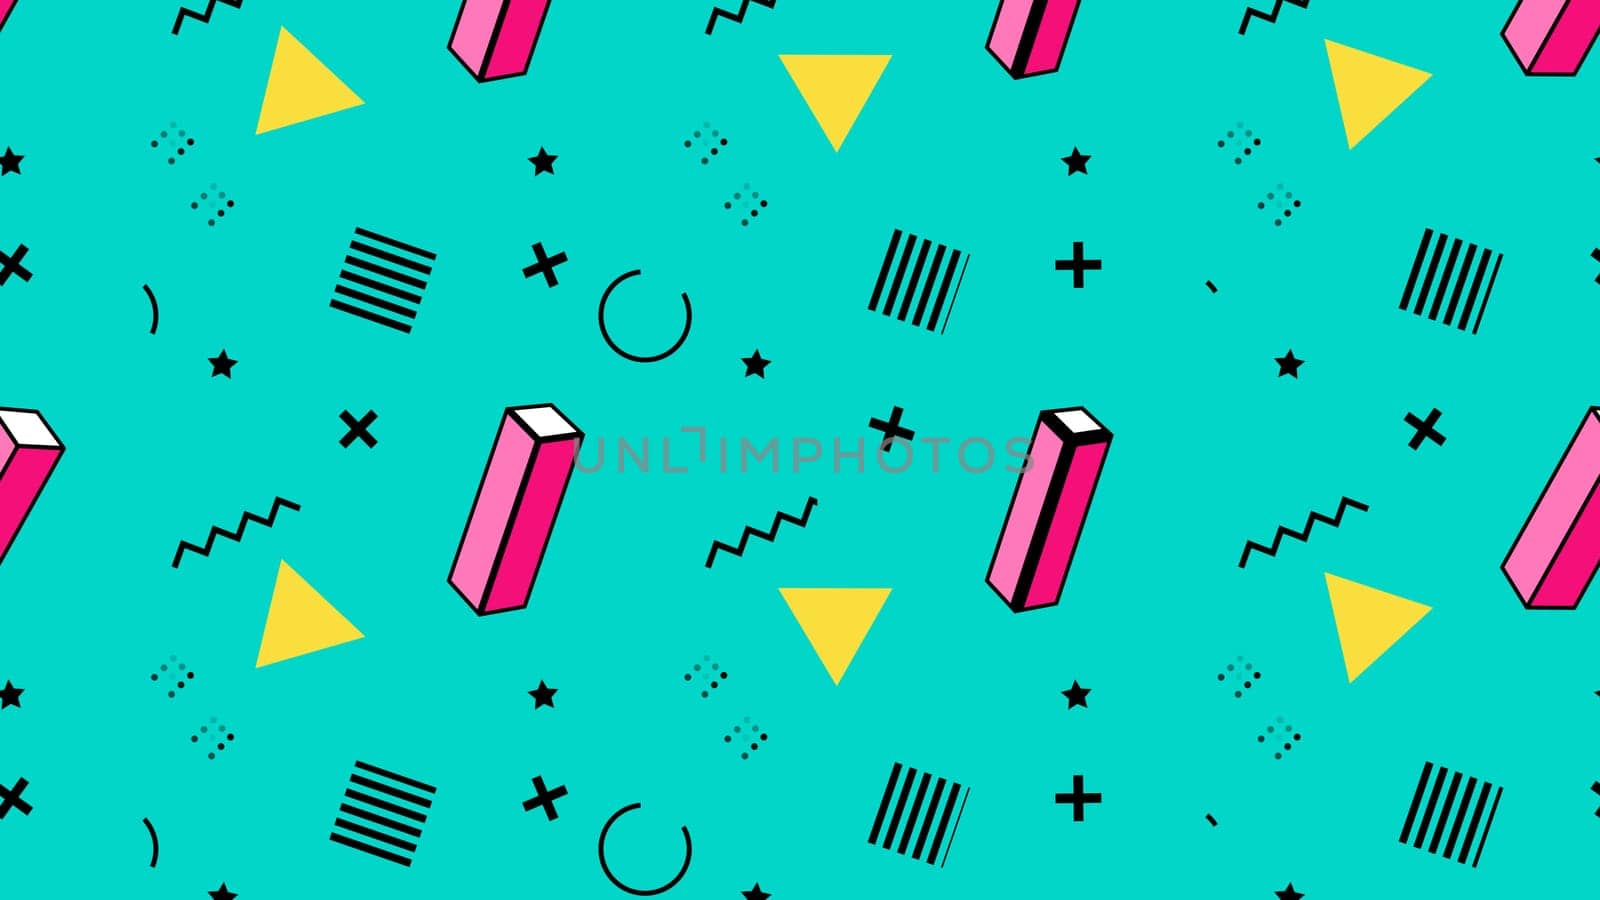 Geometric retro background pop art style with pink yellow shapes on light green composition.